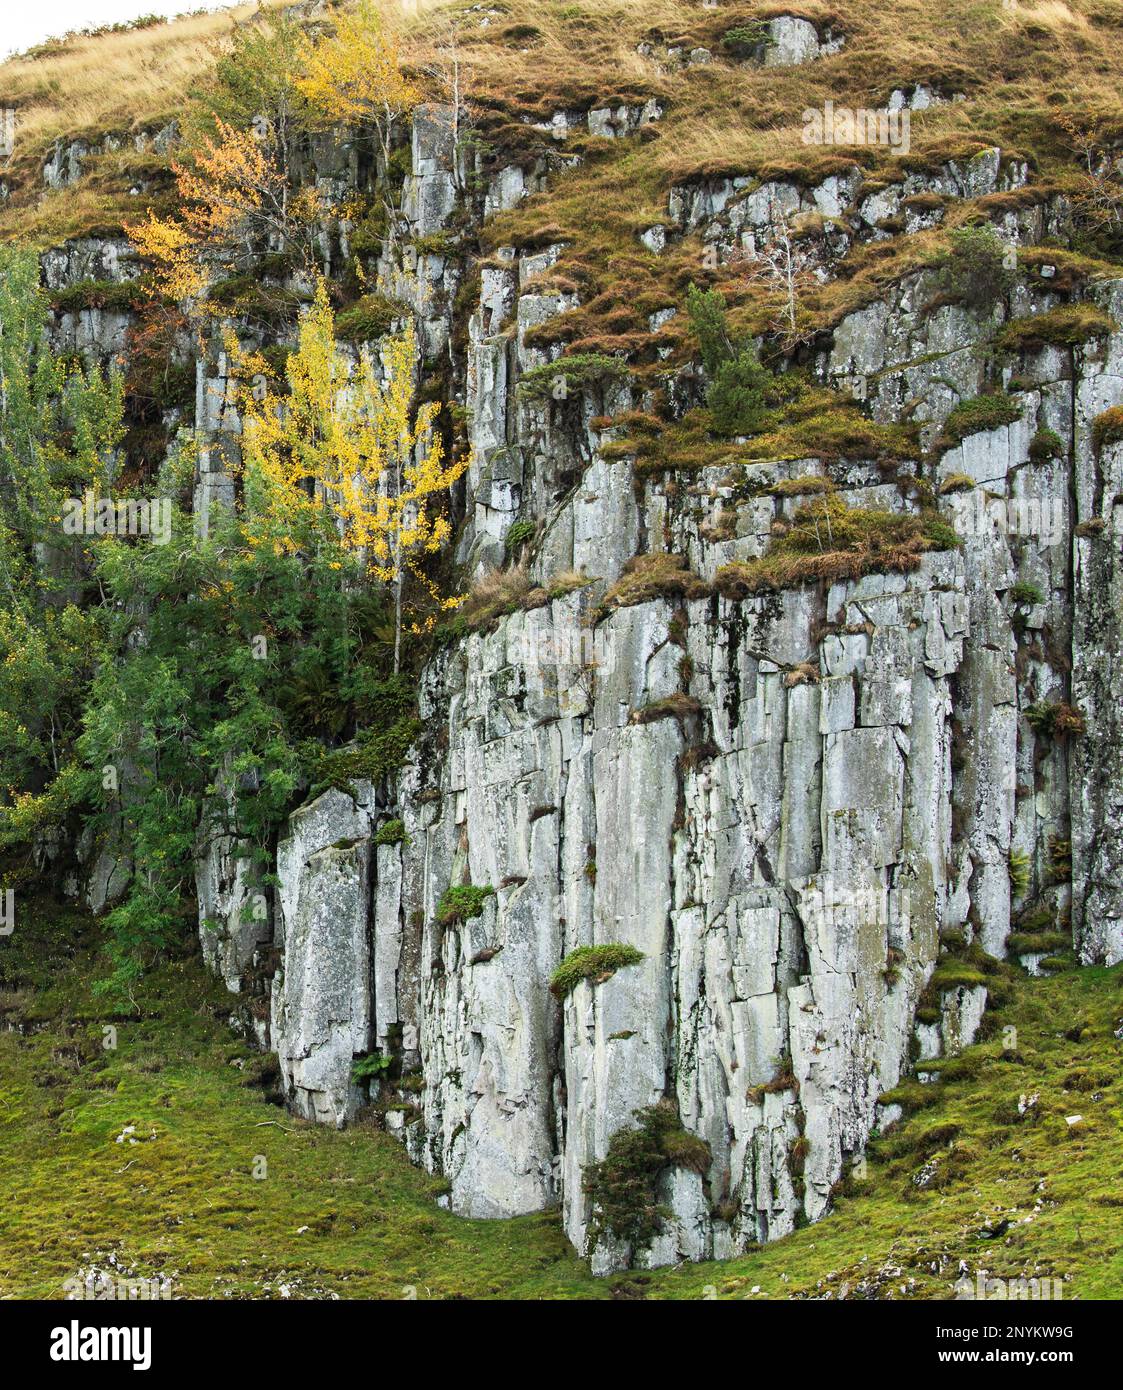 Ash, silver birch and juniper grow on the dolerite cliffs of Holwick Scars Upper Teesdale, County Durham, part of the Whin Sill Stock Photo